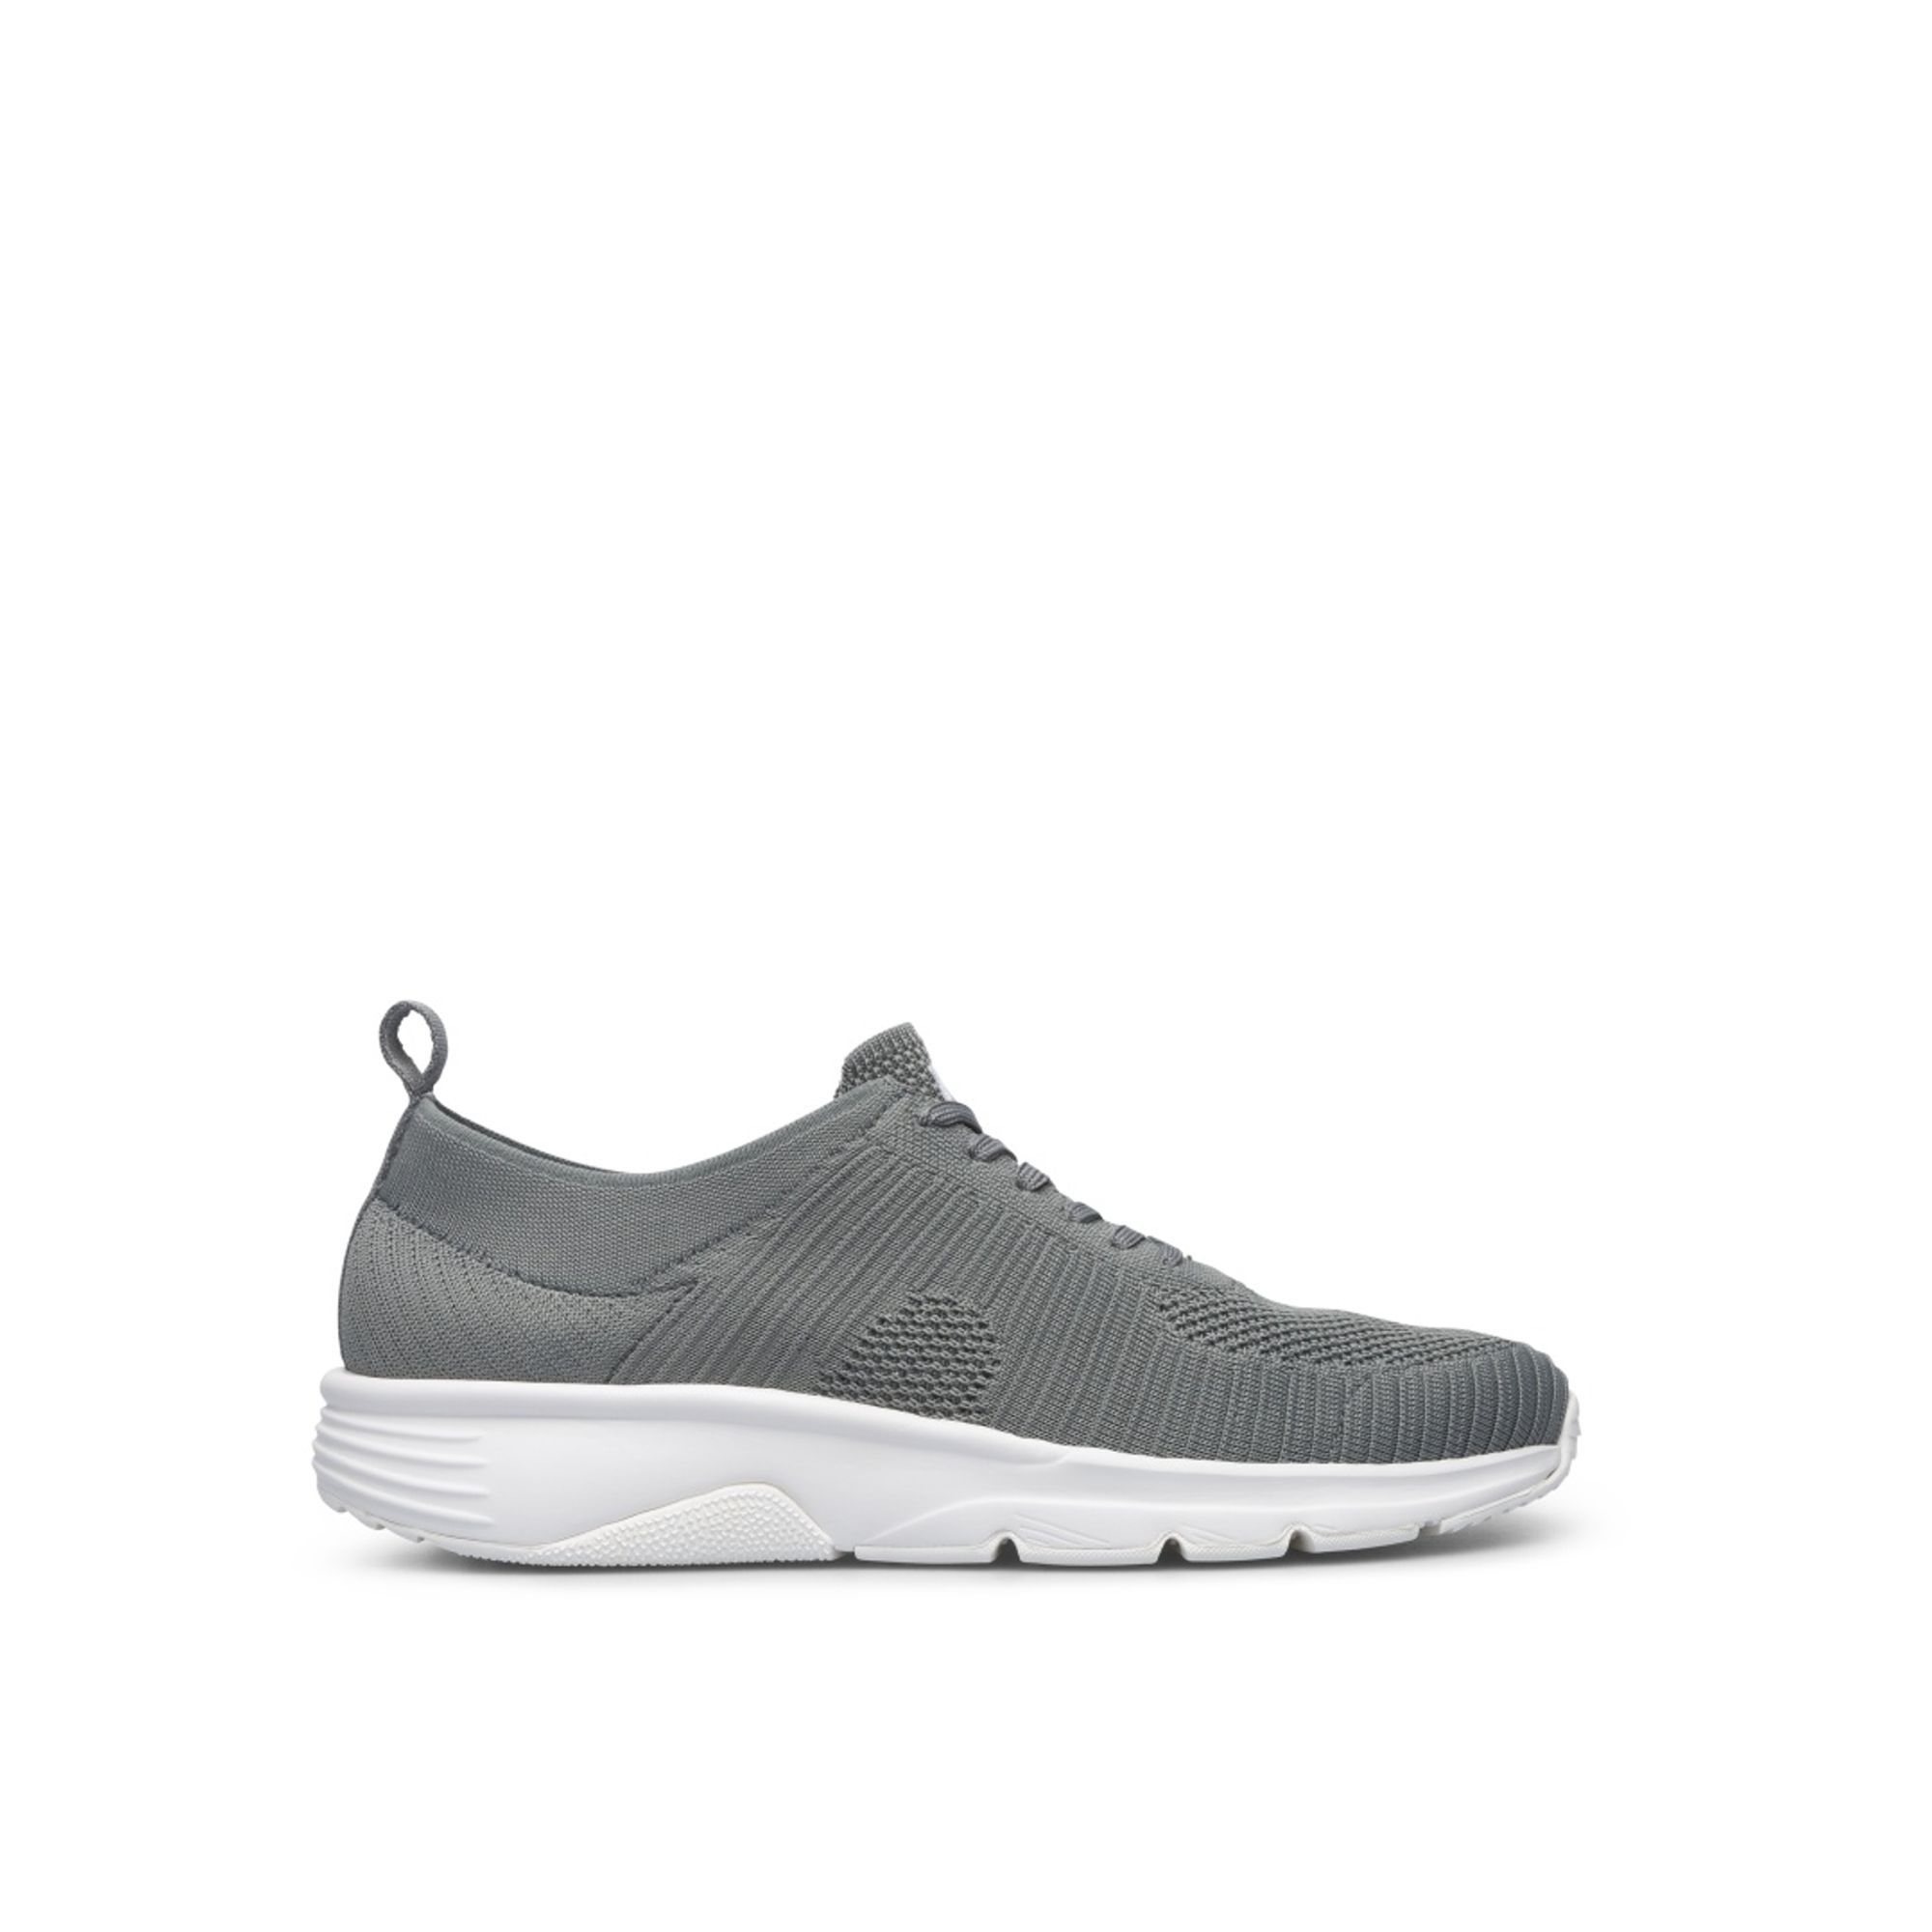 Grey sneaker for men made of 90% recycled PET fabric. With grey laces and white outsole.

A Little Better, Never Perfect 

Our Drift men's sneakers boast a lightweight construction and a sporty silhouette inspired by '90s athletic shoes.